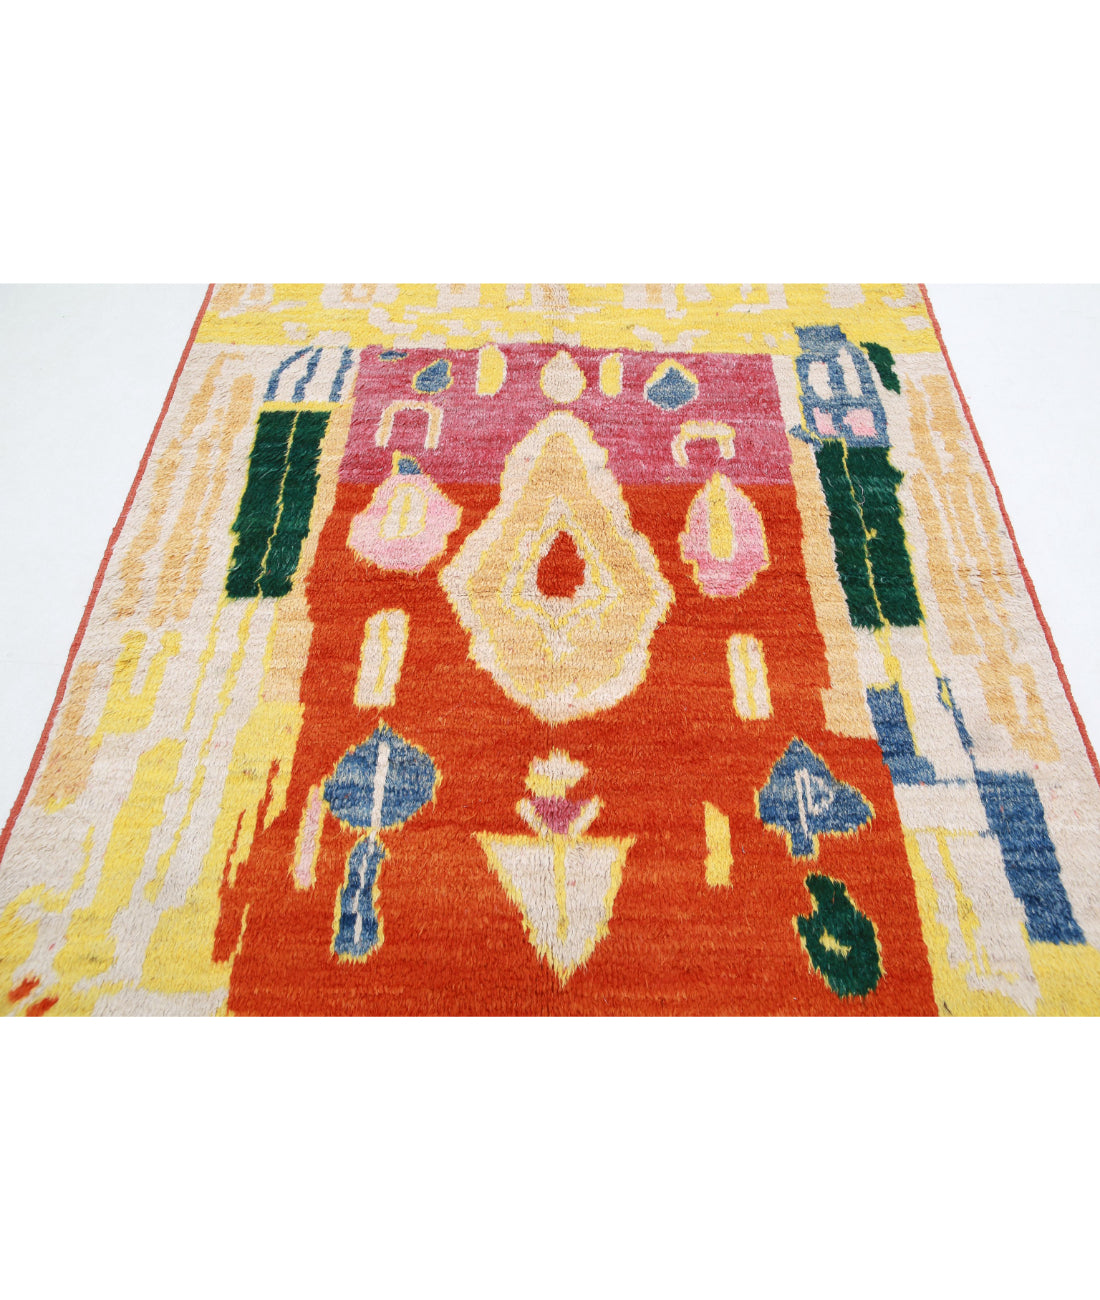 Hand Knotted Tribal Moroccan Wool Rug - 5'3'' x 6'11'' 5'3'' x 6'11'' (158 X 208) / Multi / Multi